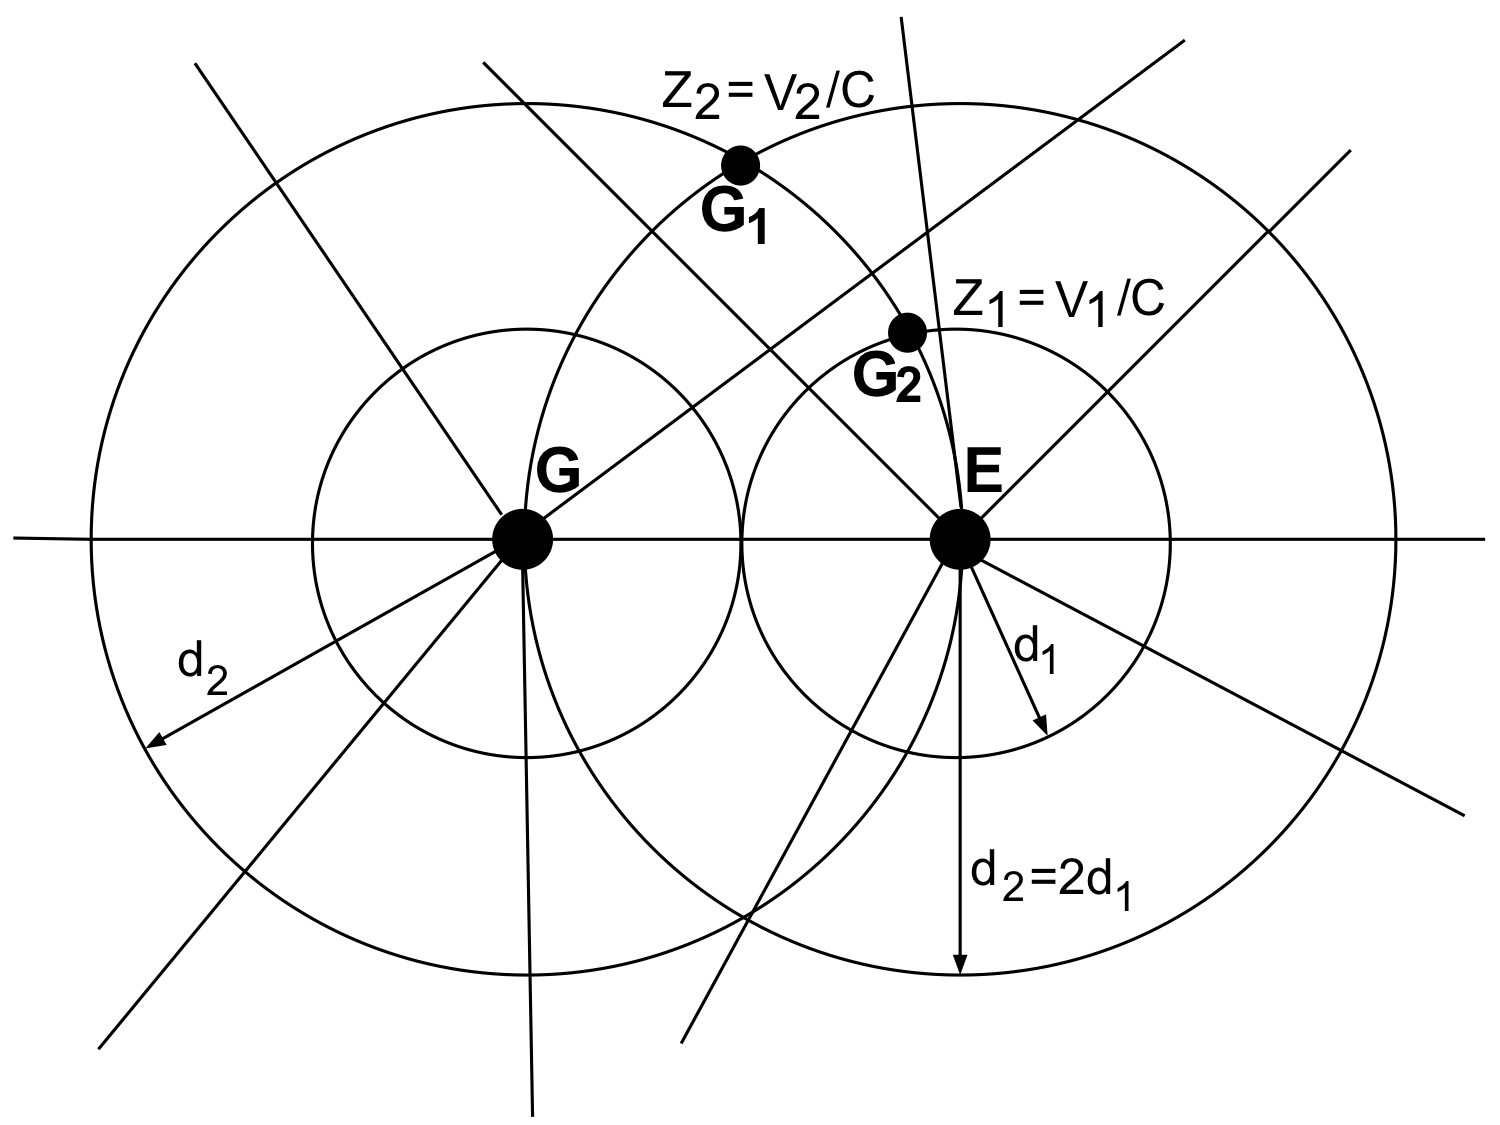 Fig. 5. Santilli diagram establishing the inconsistency of the expansion of the universe because accelerations of galaxies are not the same for all observers in the universe.